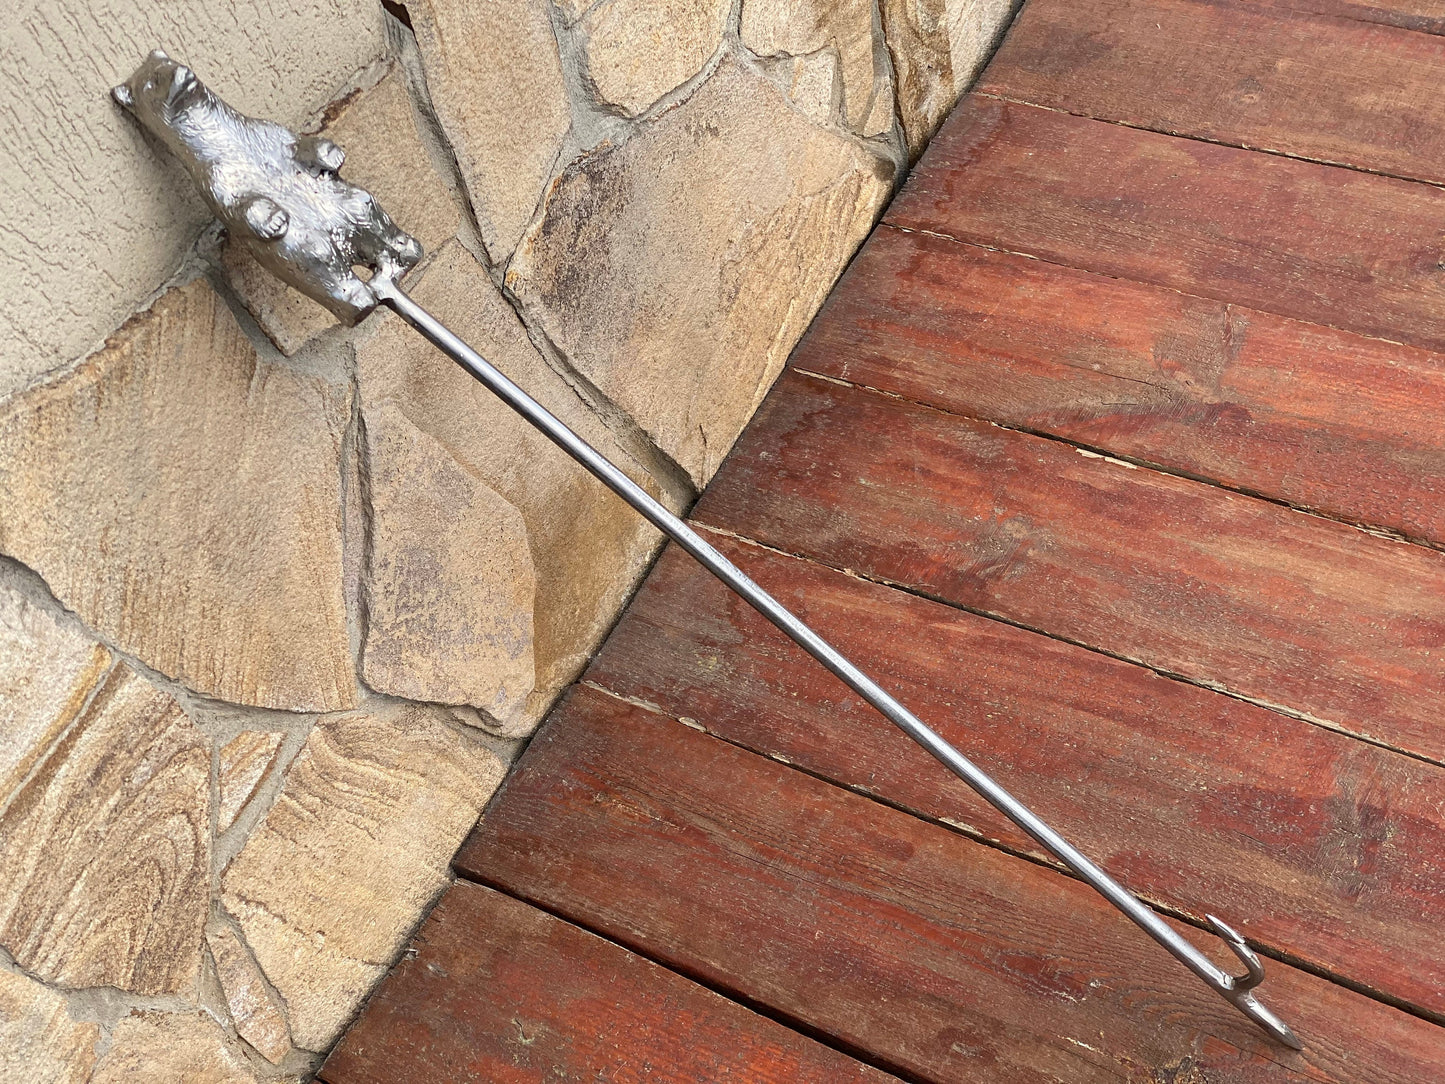 Stainless steel fire poker, bear, Christmas, fire poker, birthday, steel gift, fireplace, BBQ, firewood, steel anniversary, toy, mens gift